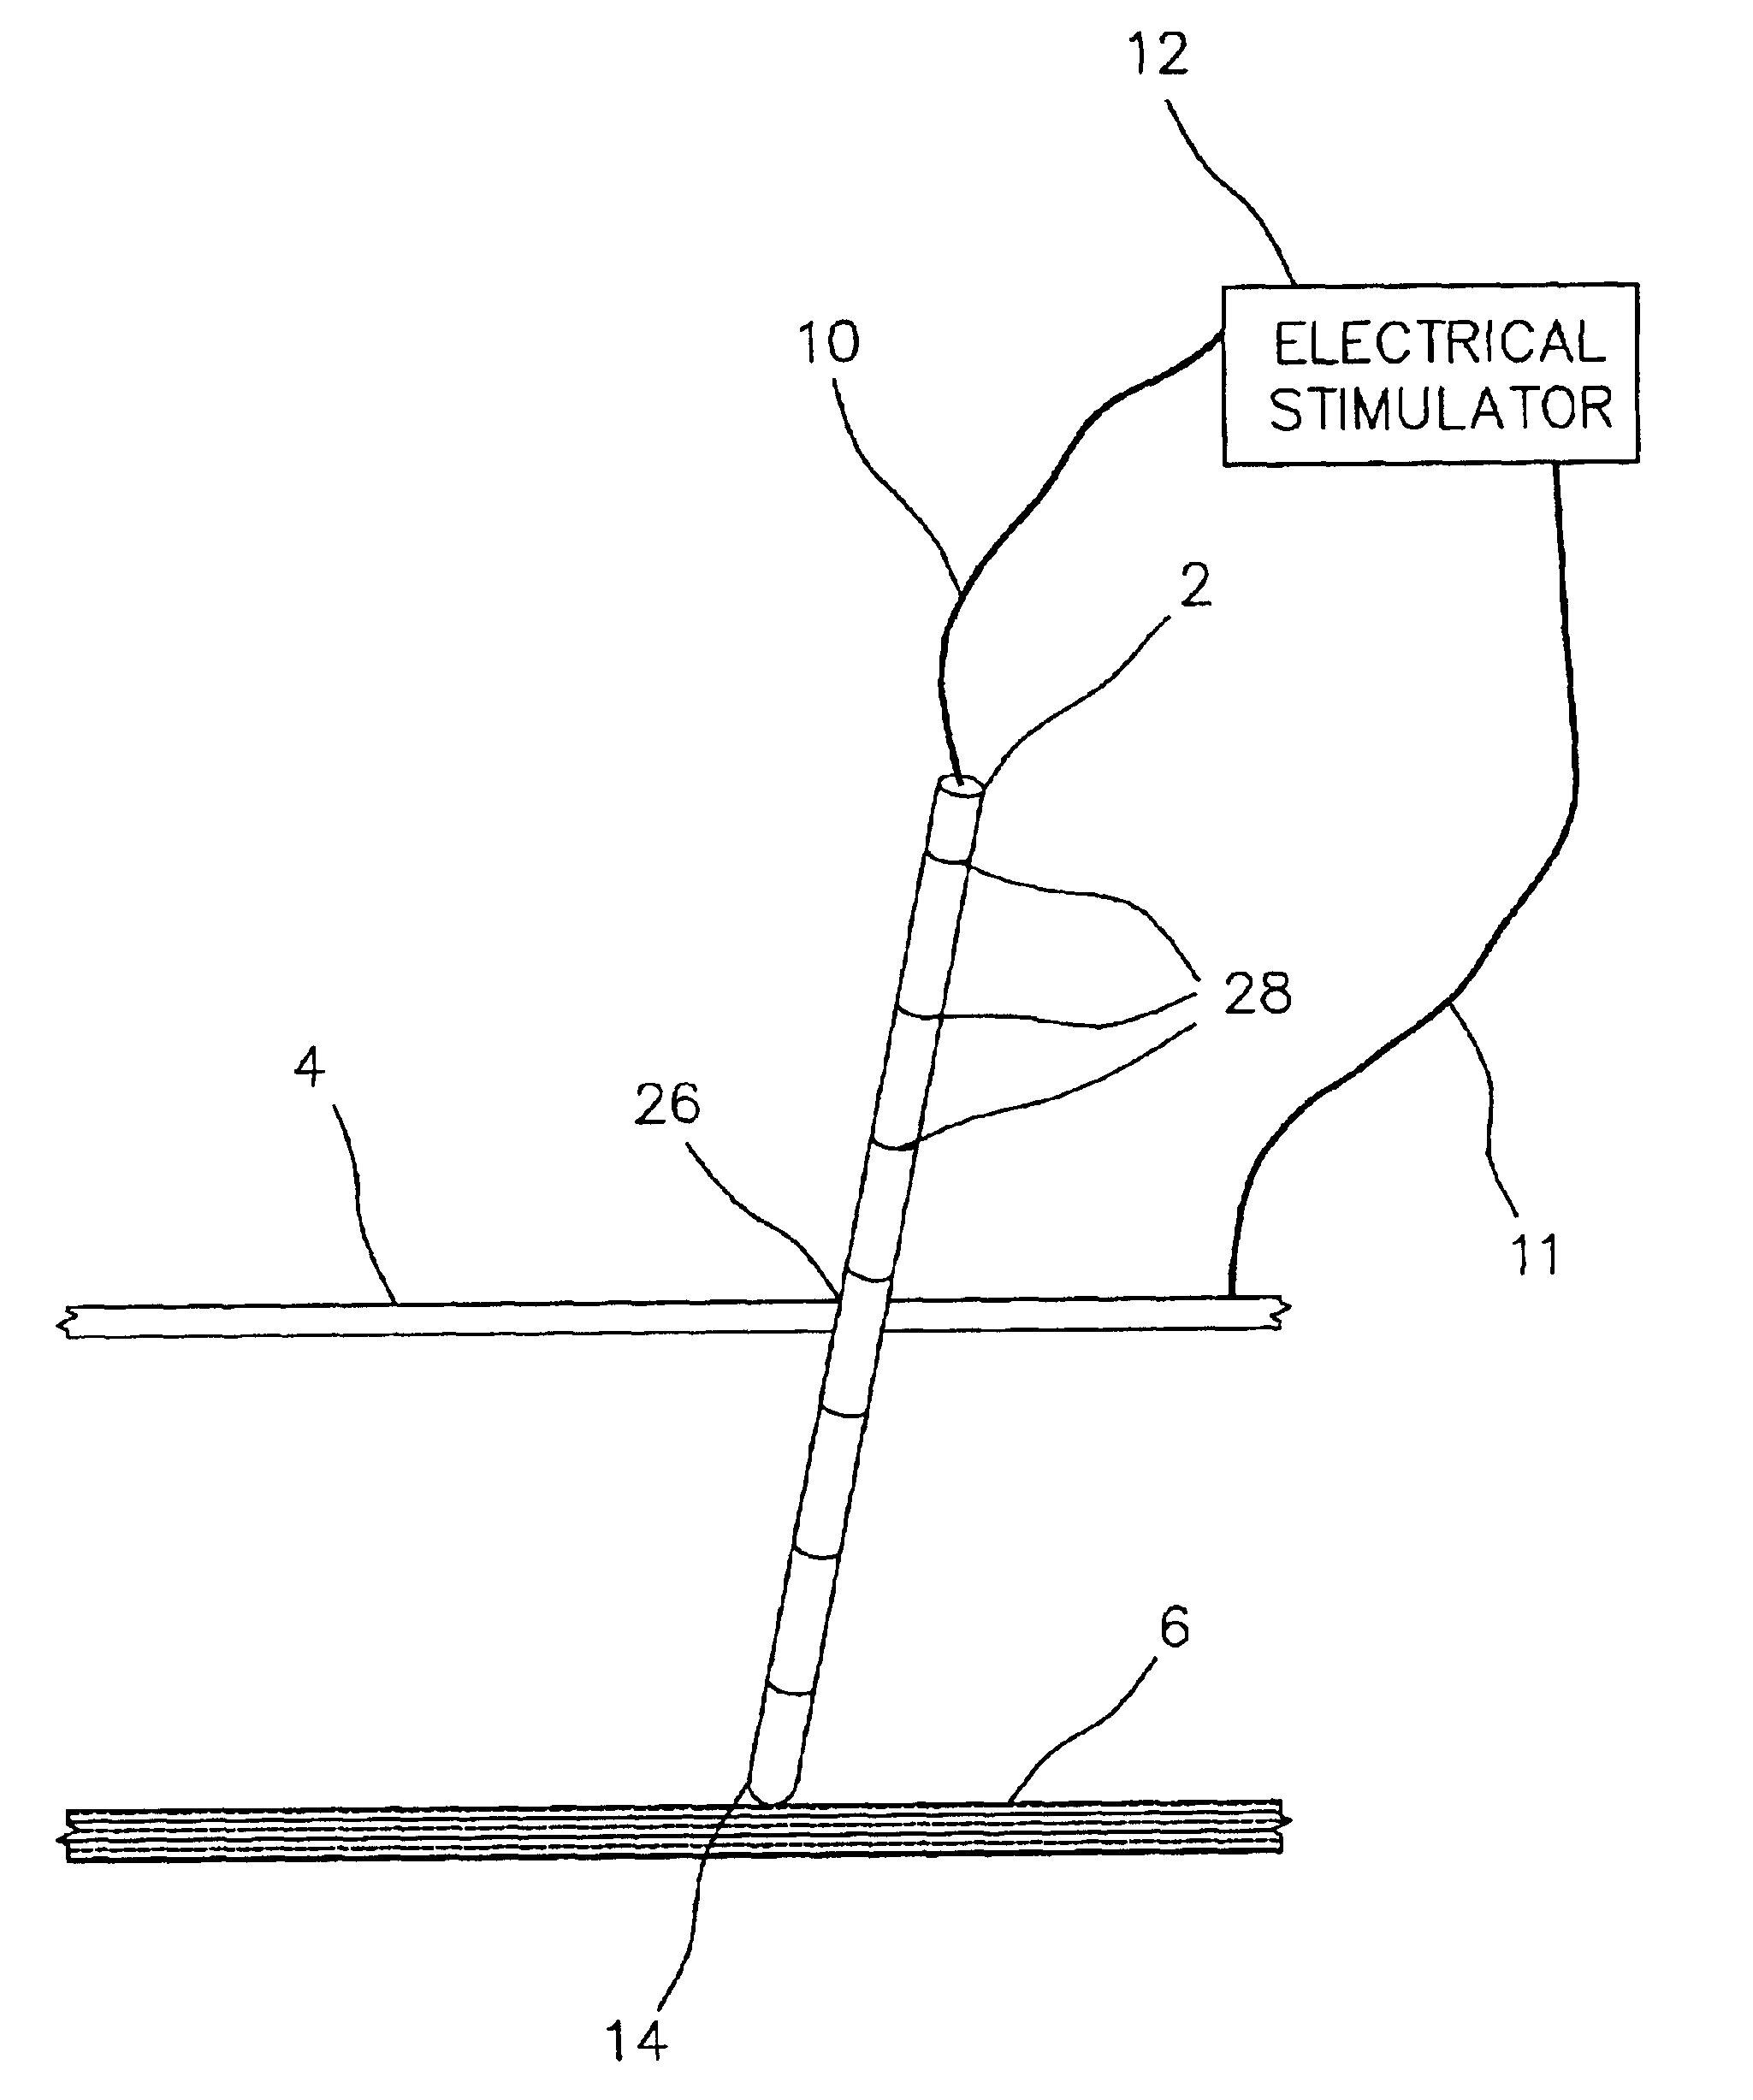 Electrically sensing and stimulating system for placement of a nerve stimulator or sensor